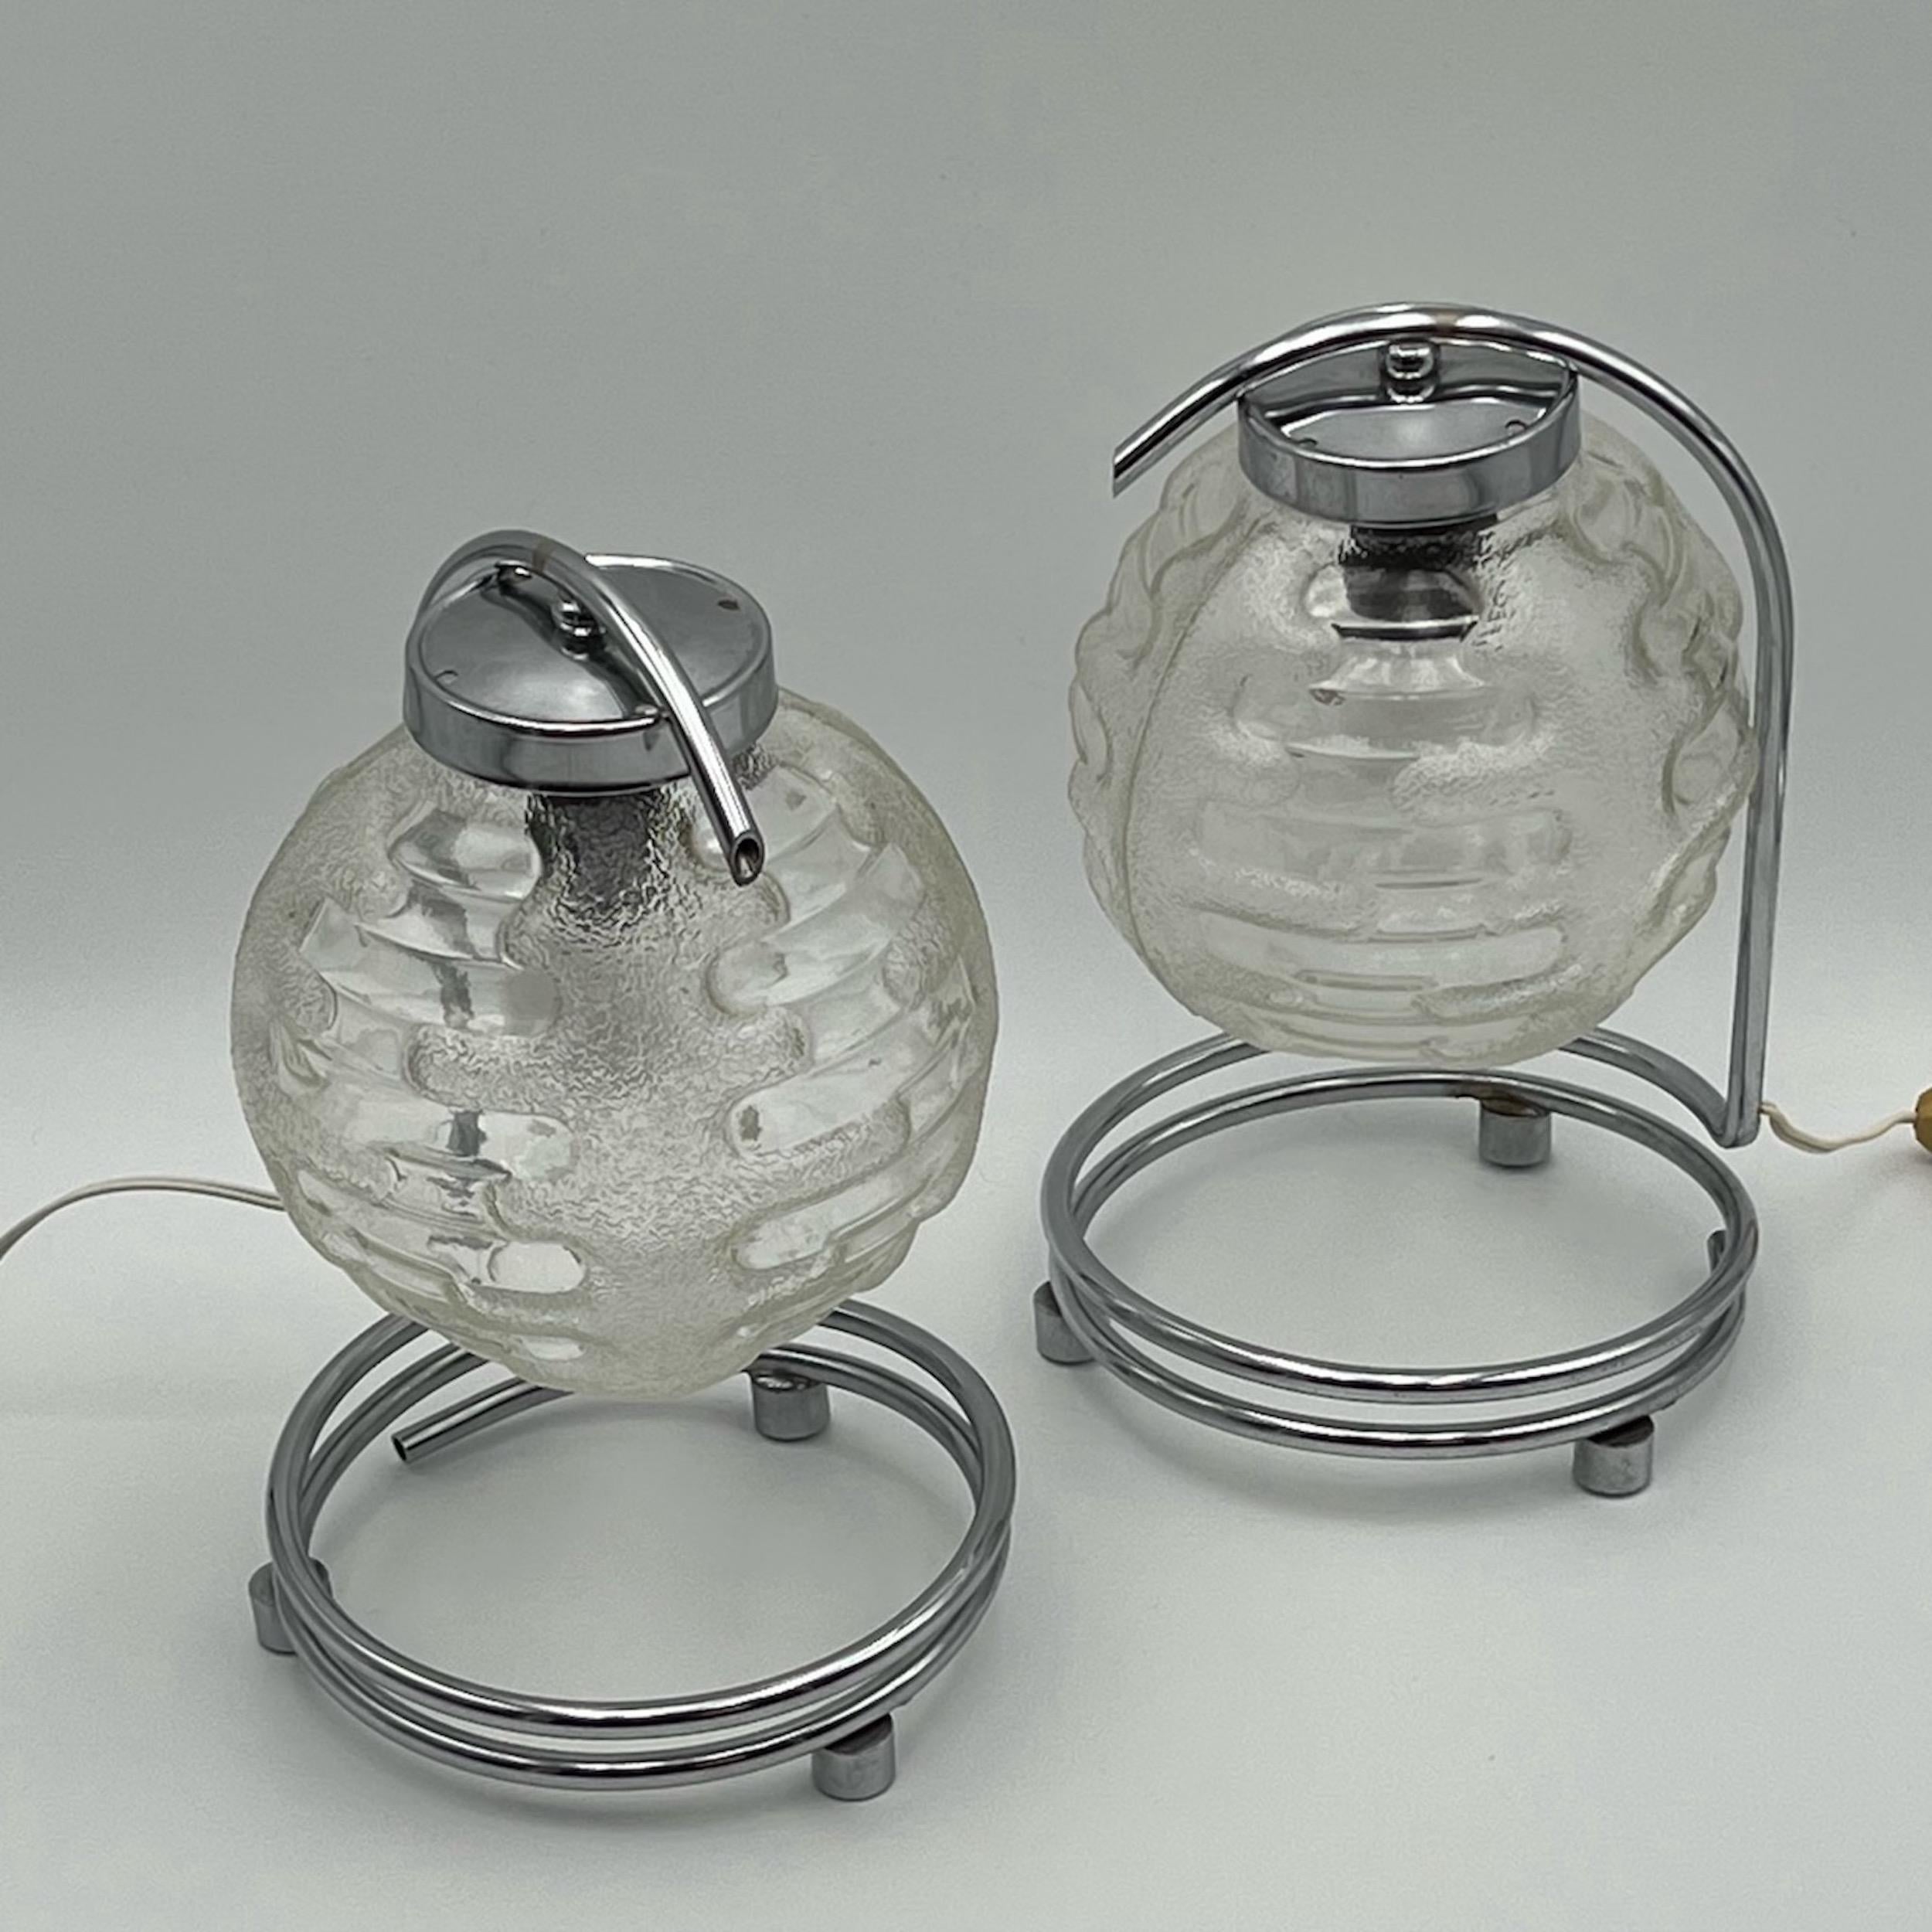 German Chromed Lamps with Patterned Glass Globes by Richard Essig, 1970s, Set of 2 For Sale